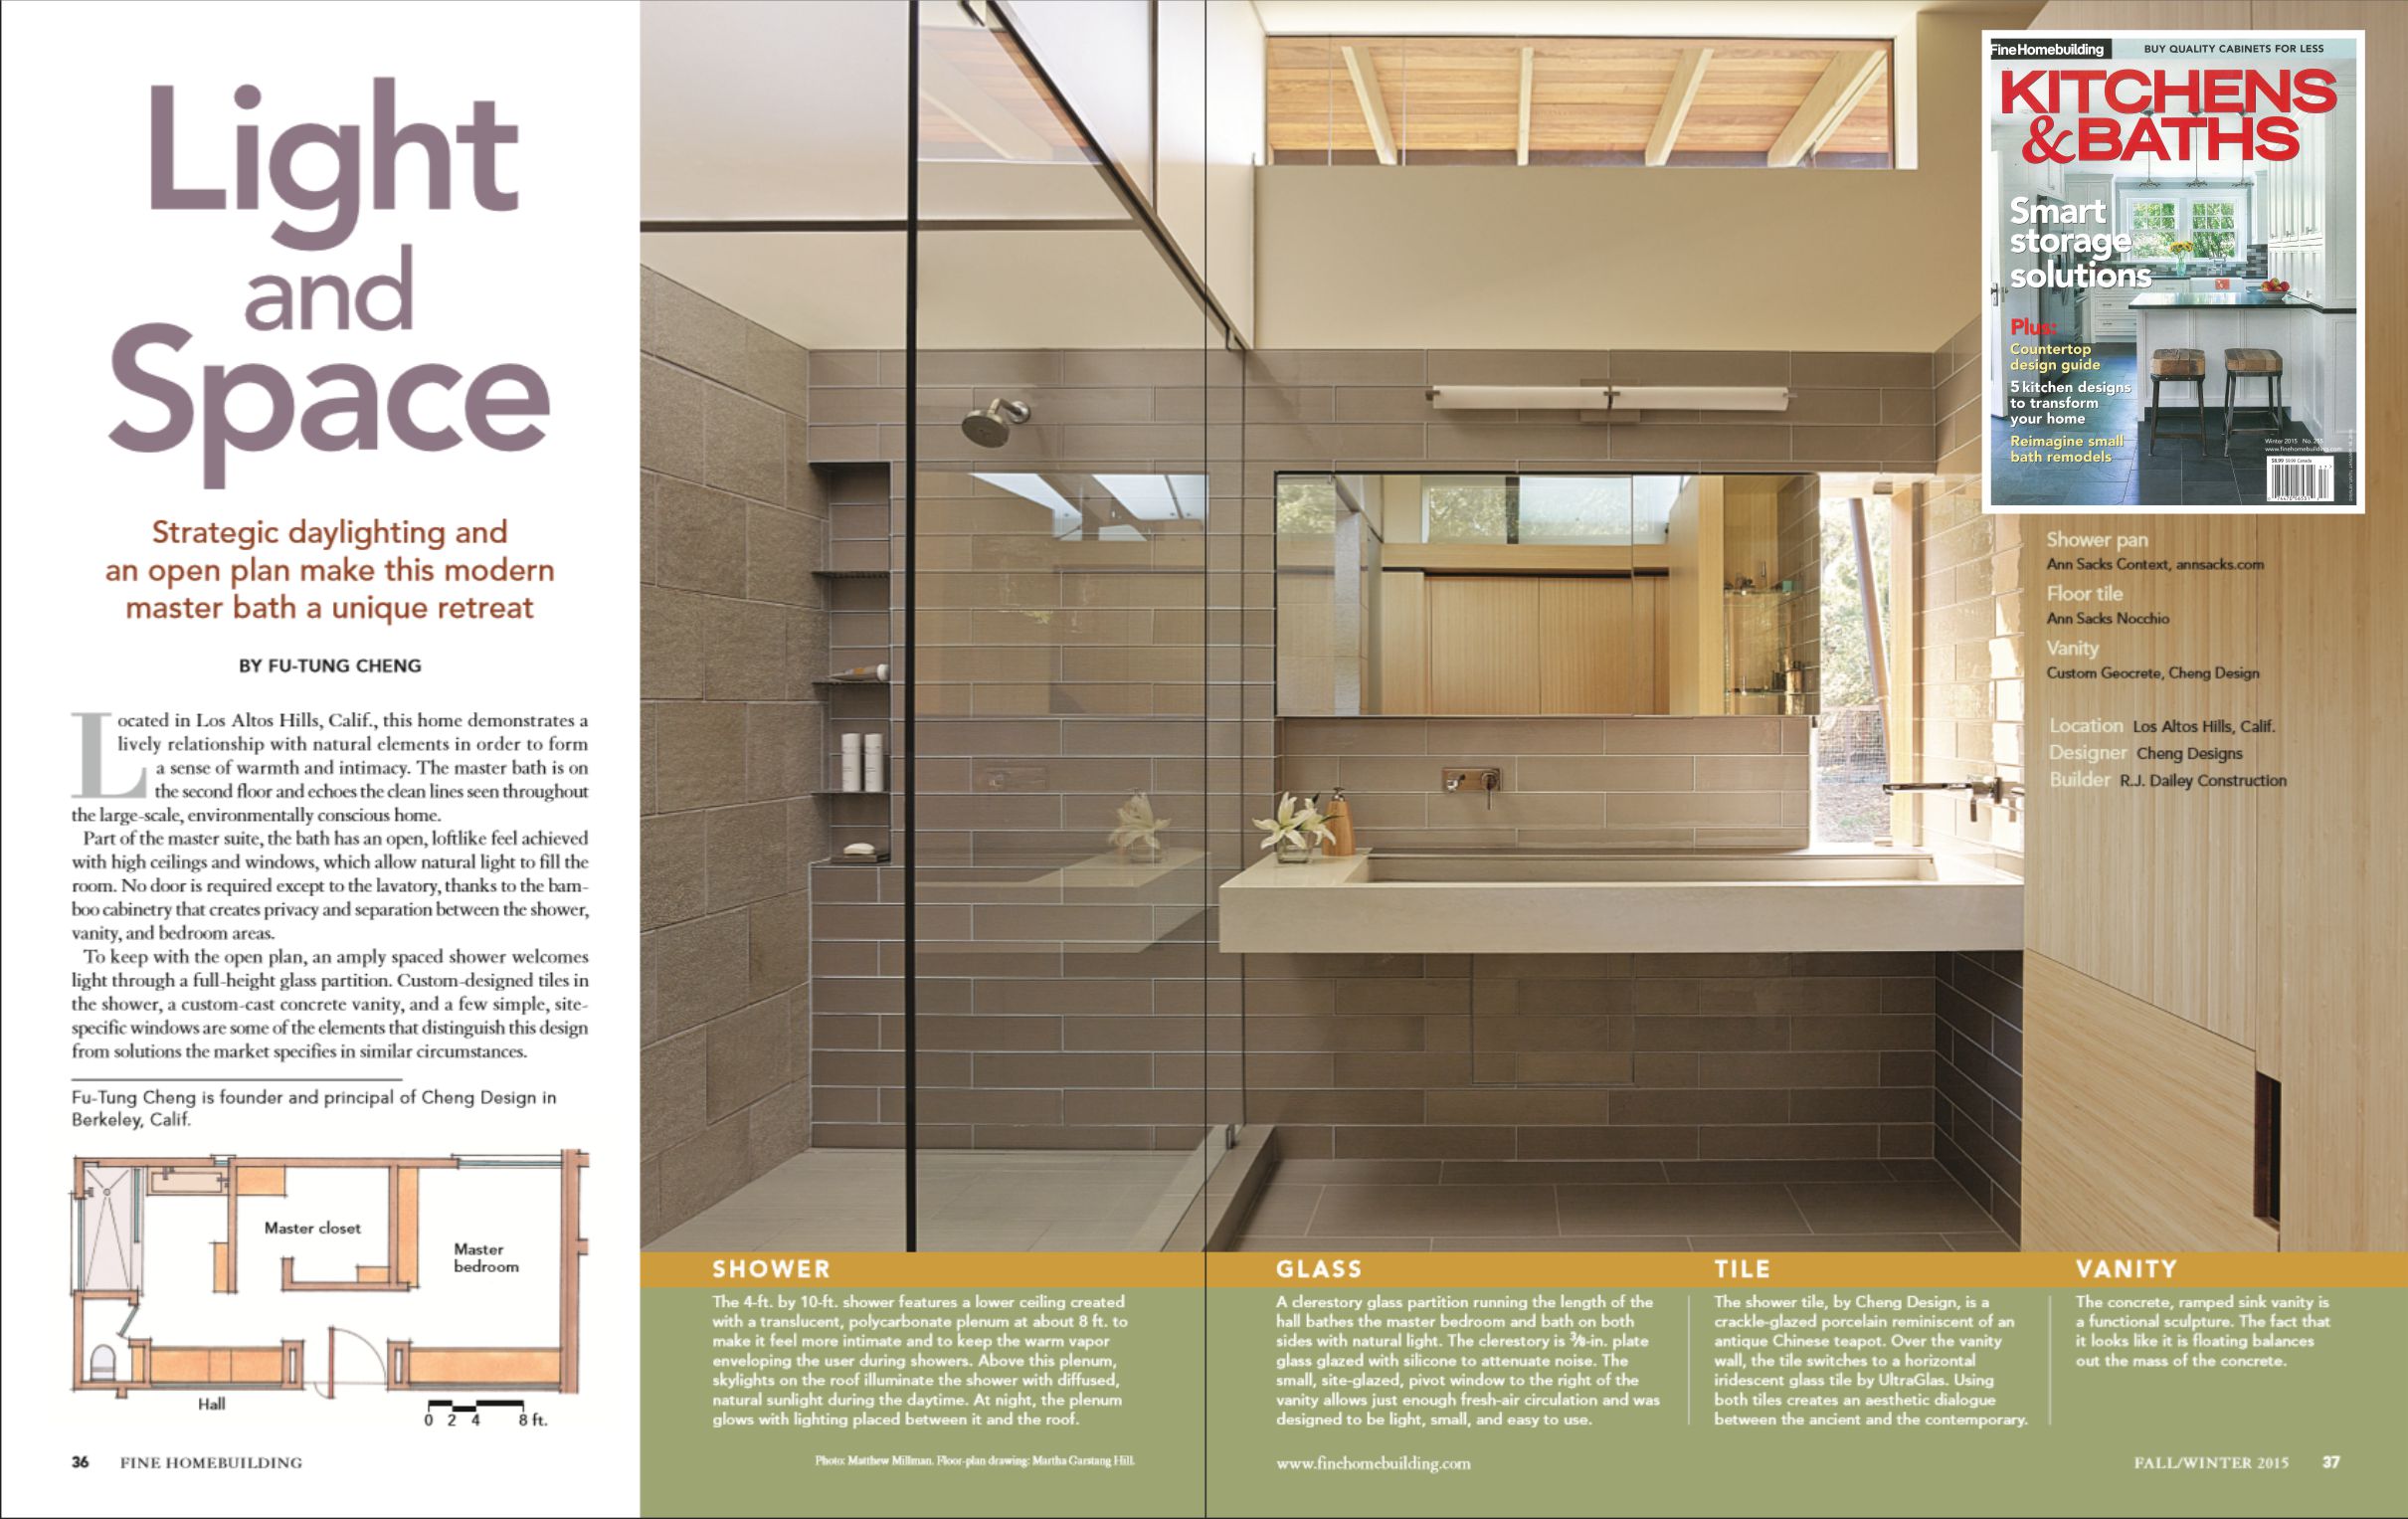 Kitchens and Baths Annual Issue: Light and Space